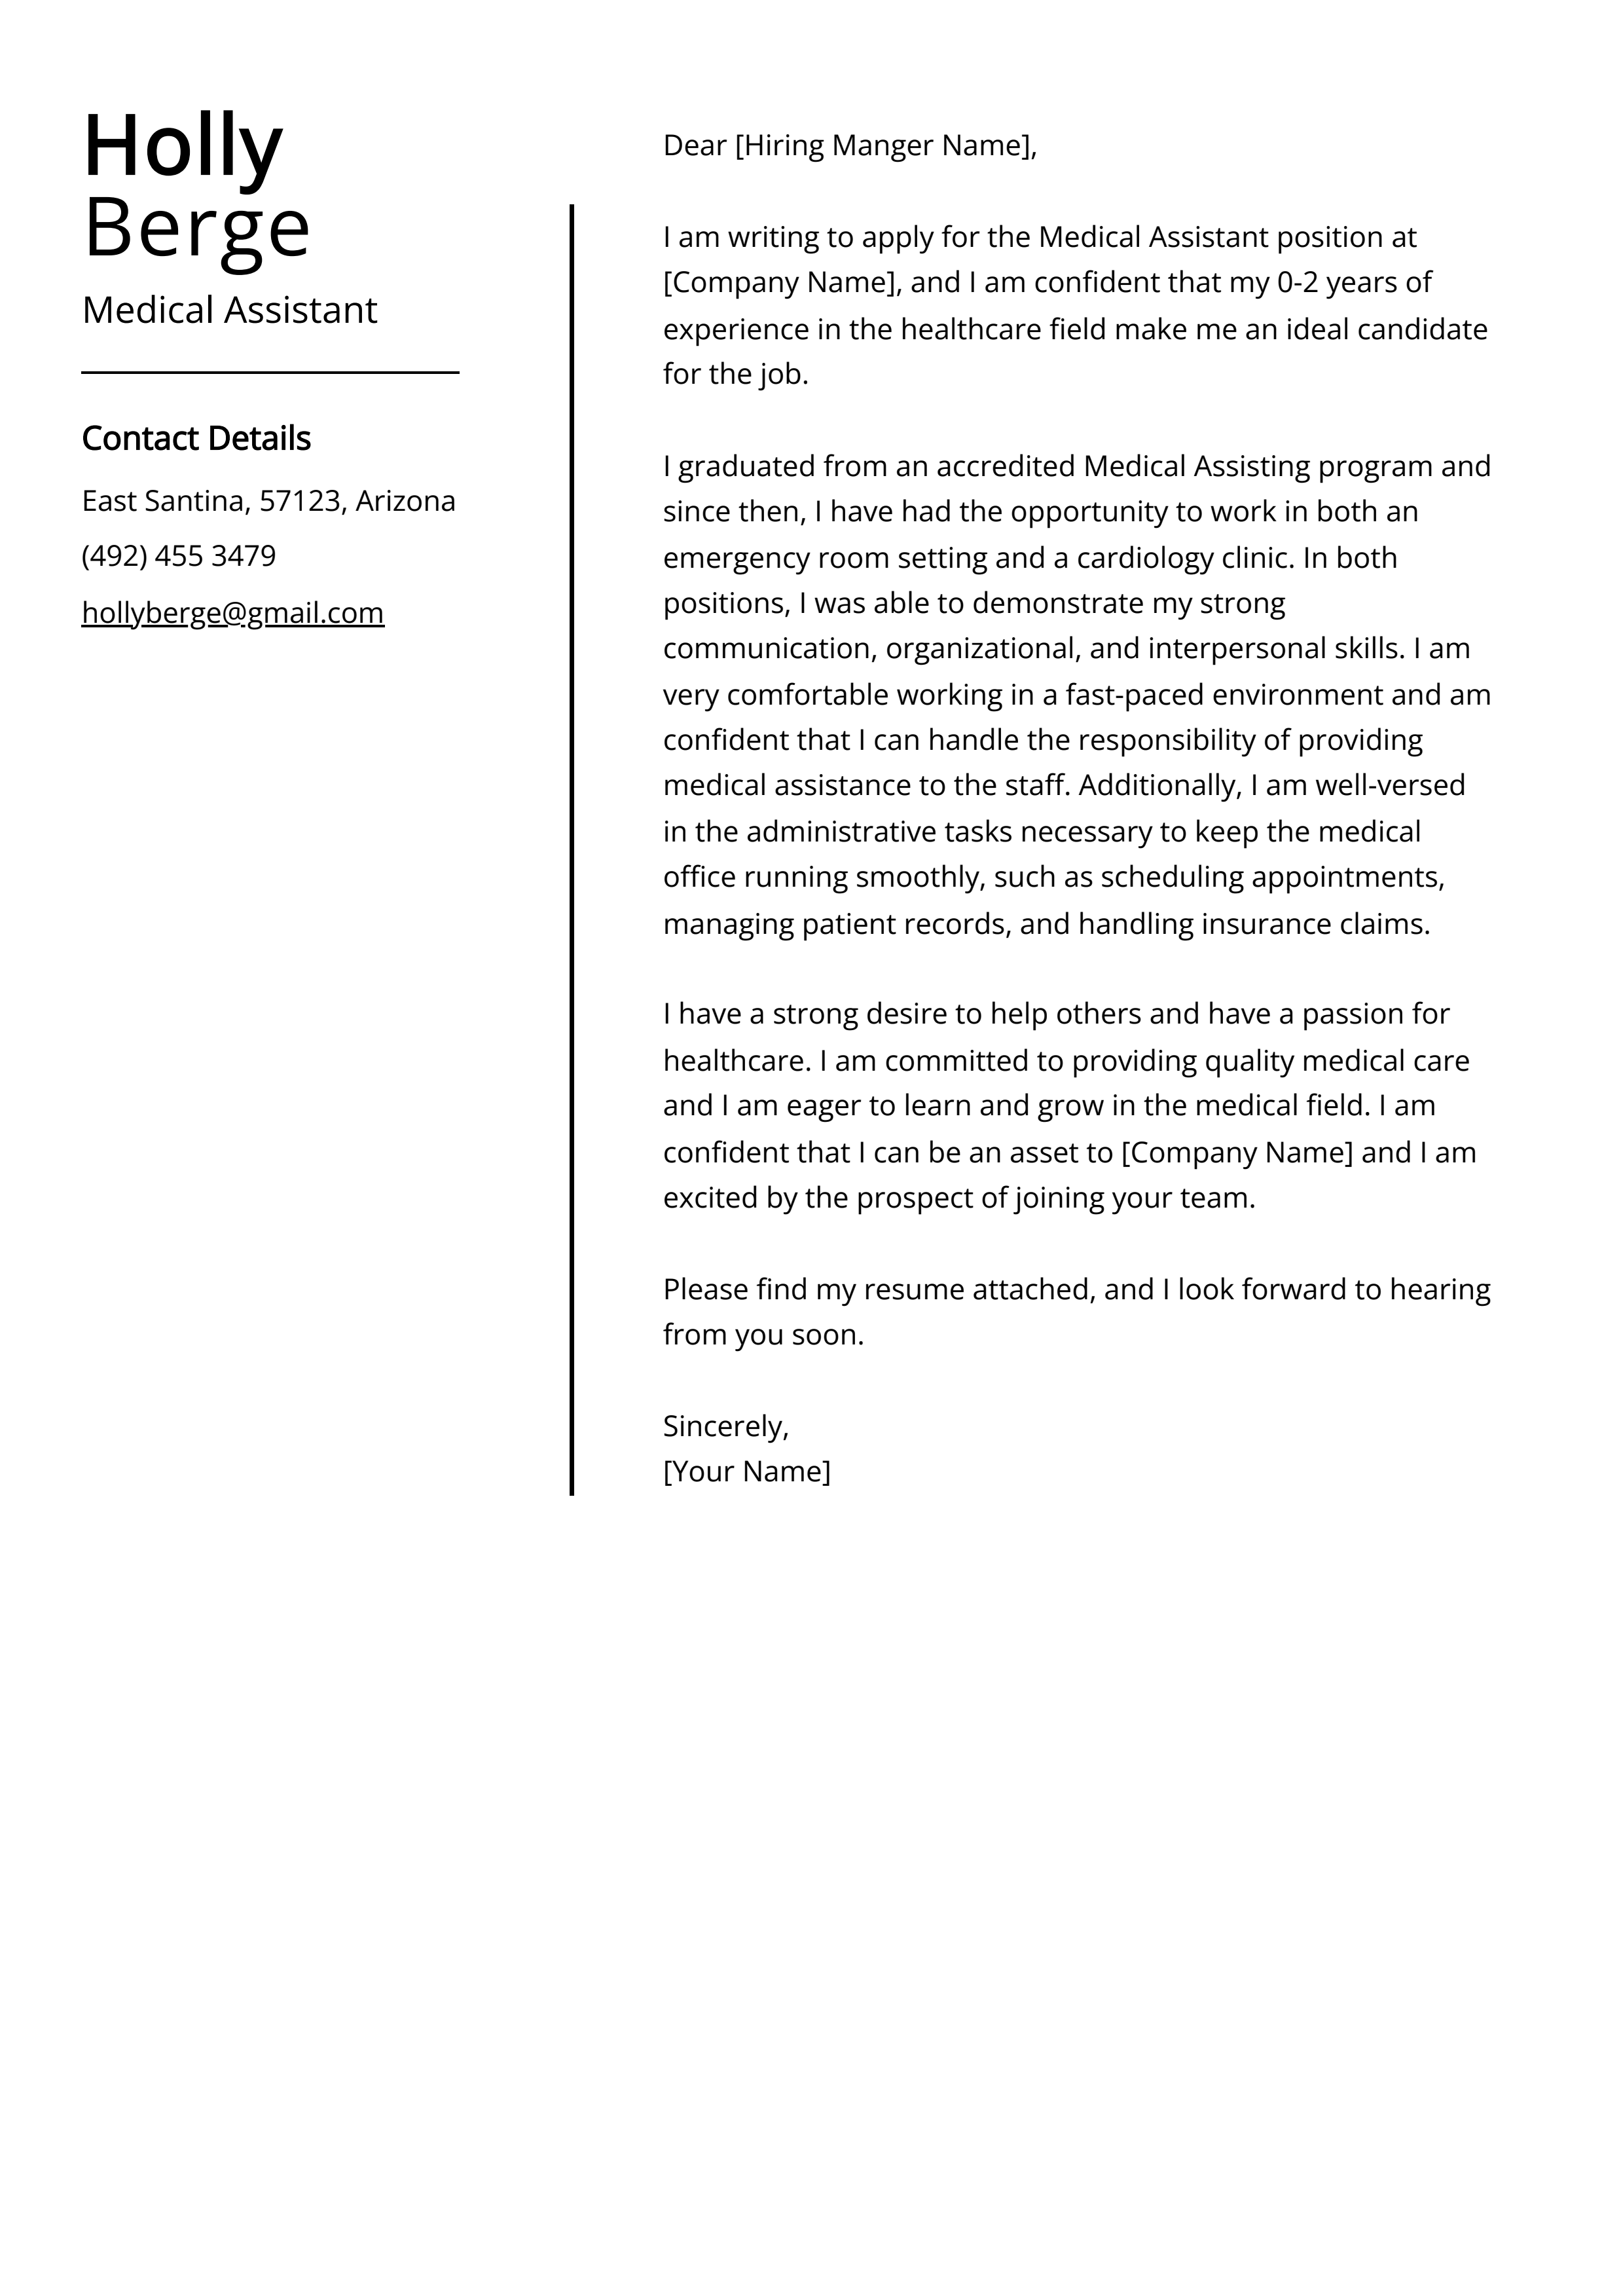 Medical Assistant Cover Letter Example